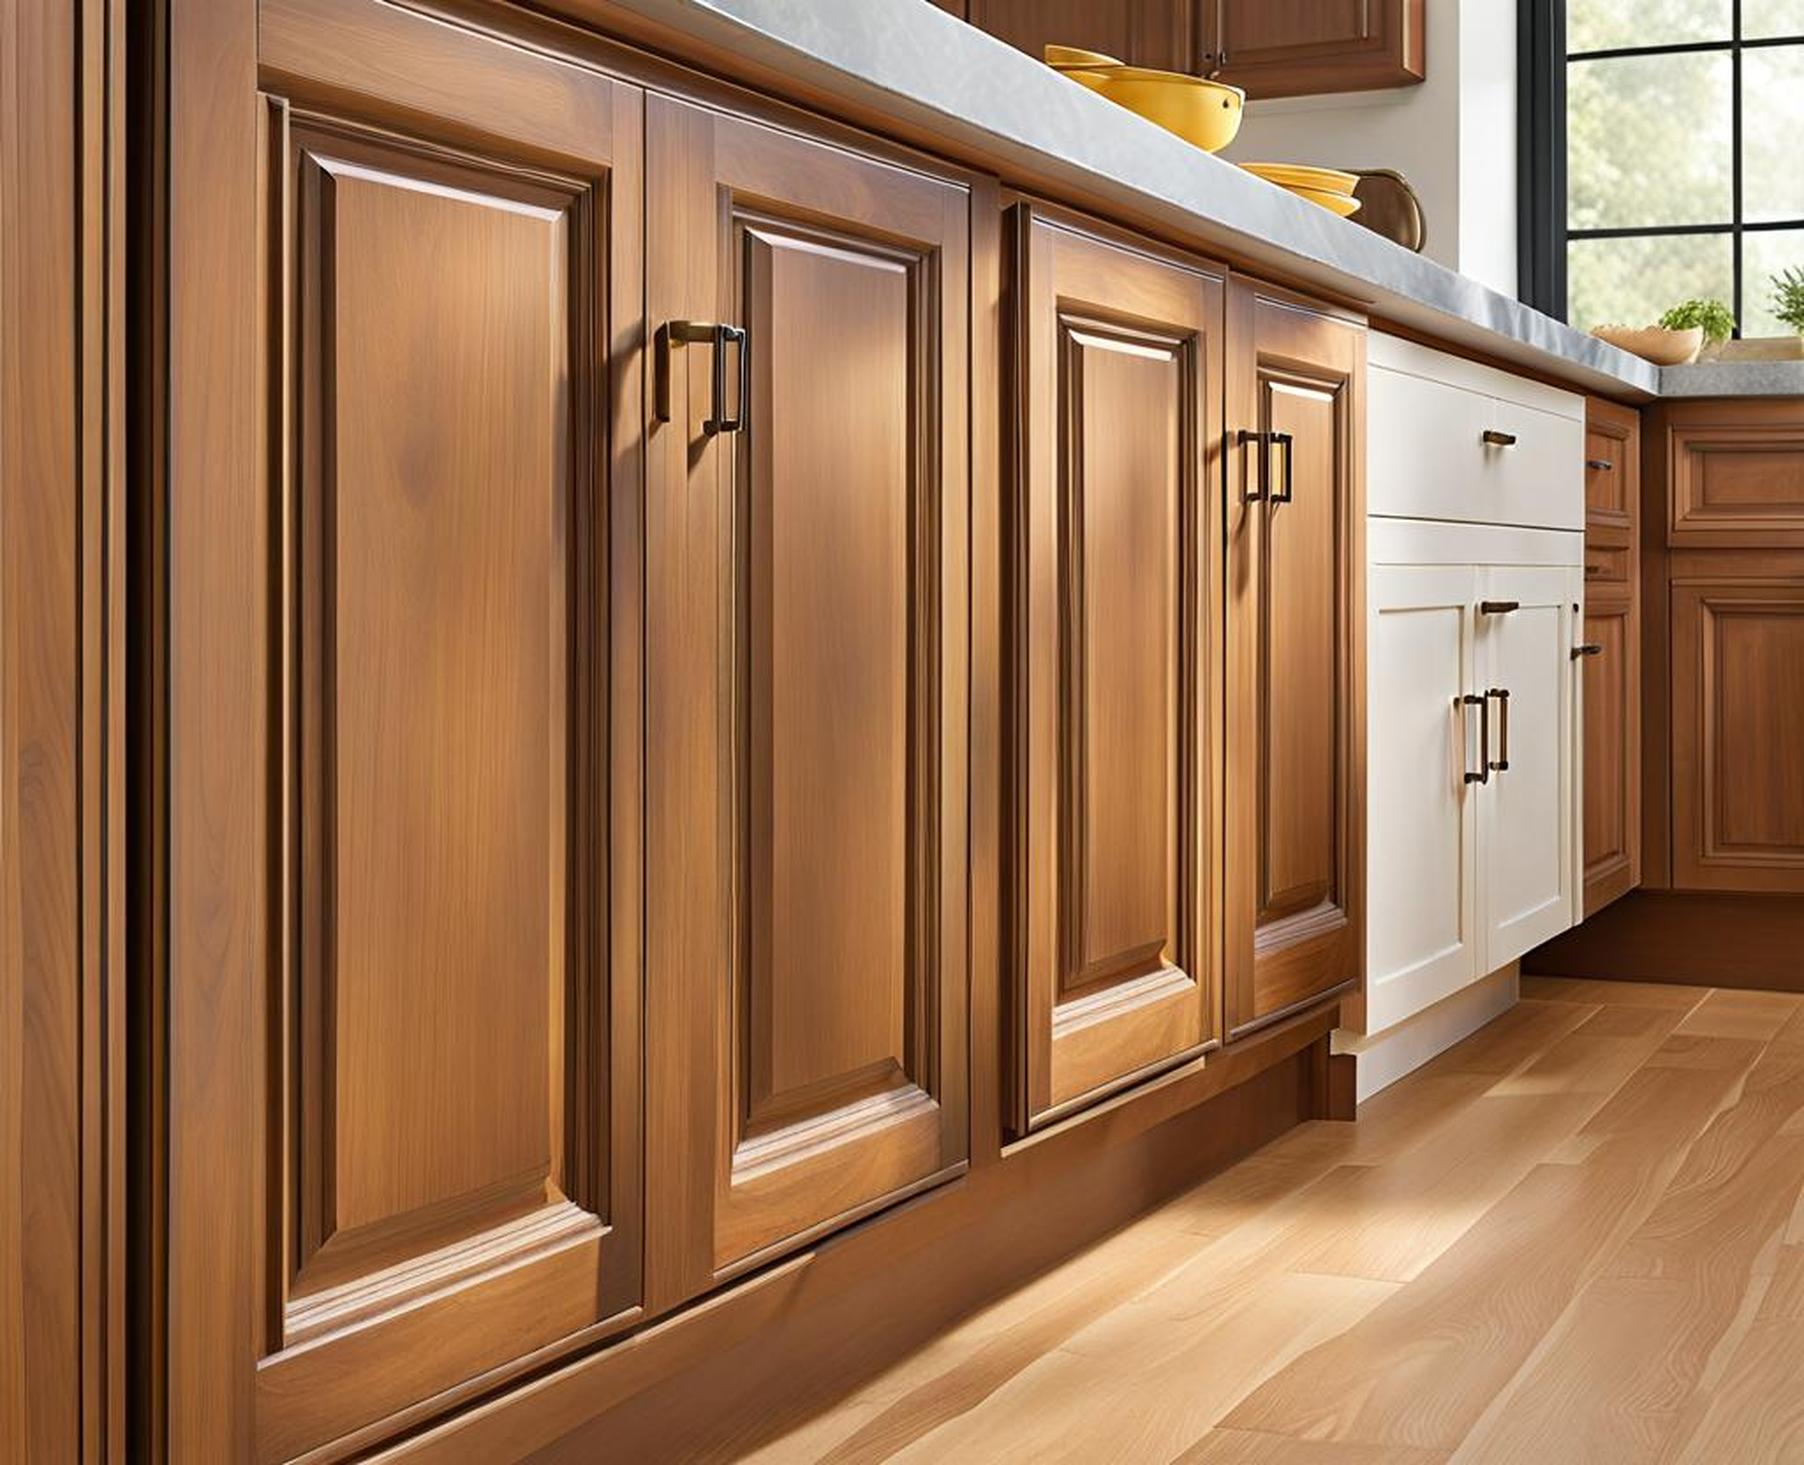 where to place handles on kitchen cabinets